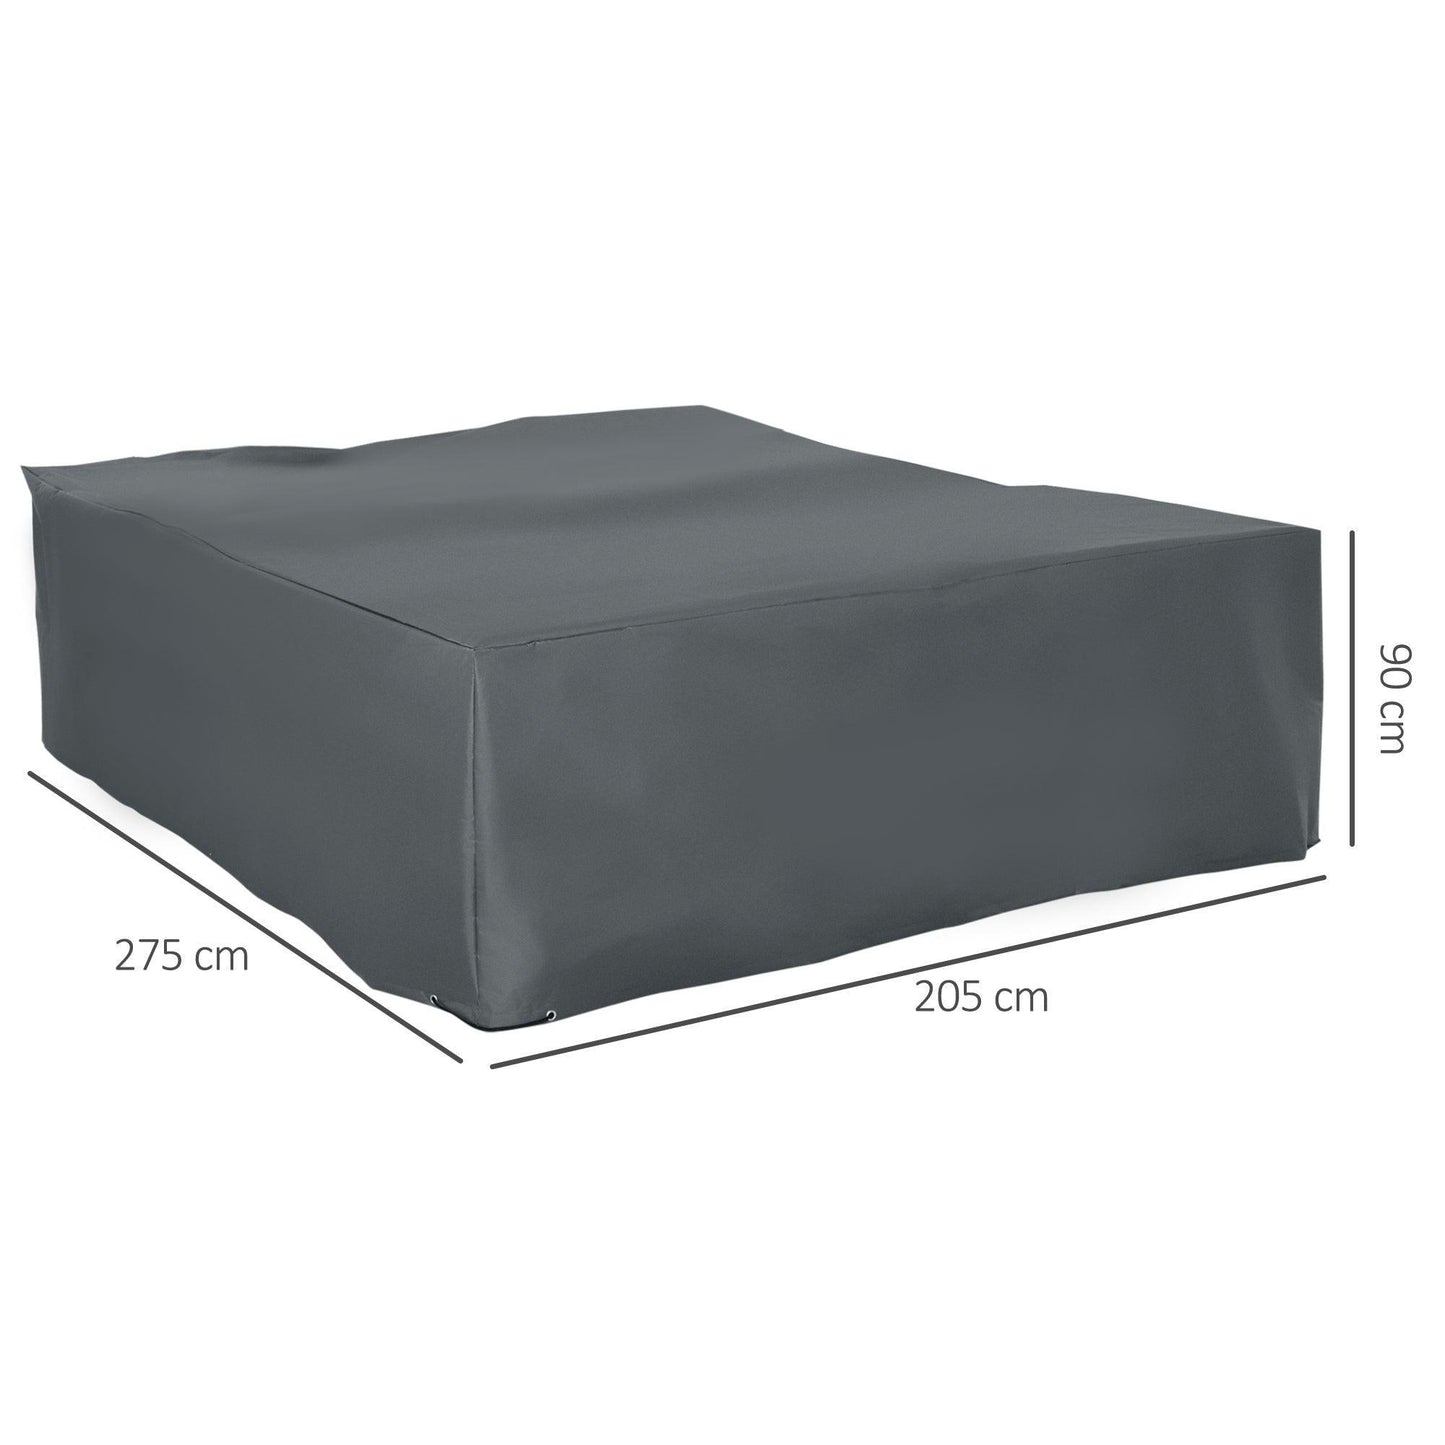 Outsunny Waterproof Outdoor Furniture Cover - ALL4U RETAILER LTD